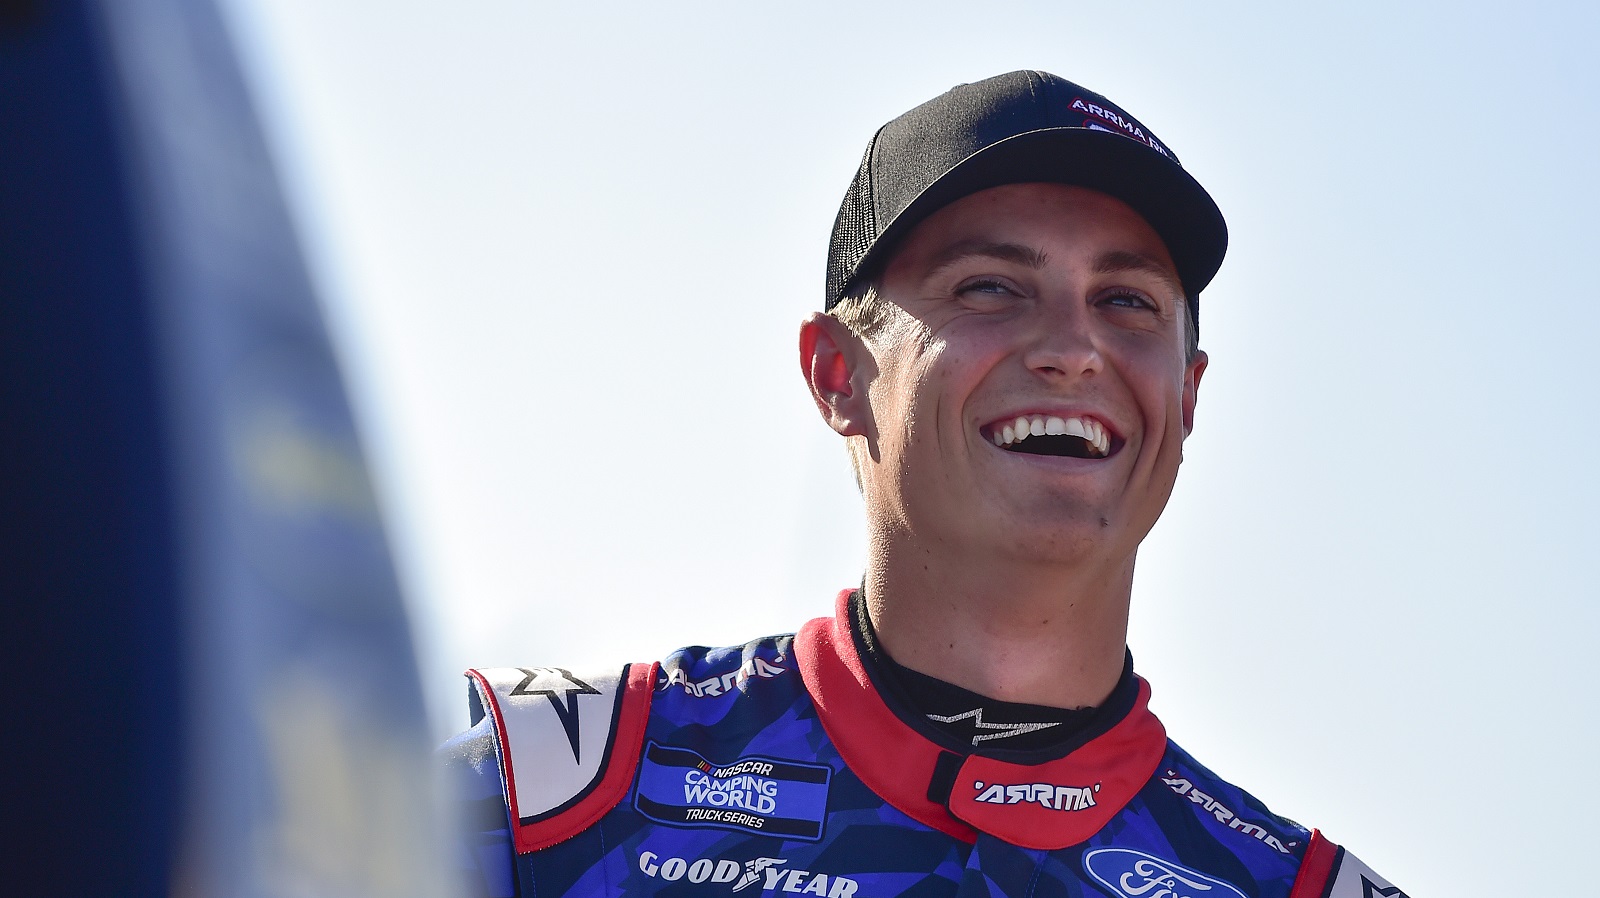 Zane Smith shares a laugh on the grid during qualifying for the NASCAR Camping World Truck Series Toyota 200 at WWT Raceway on June 3, 2022, in Madison, Illinois. | Jeff Curry/Getty Images